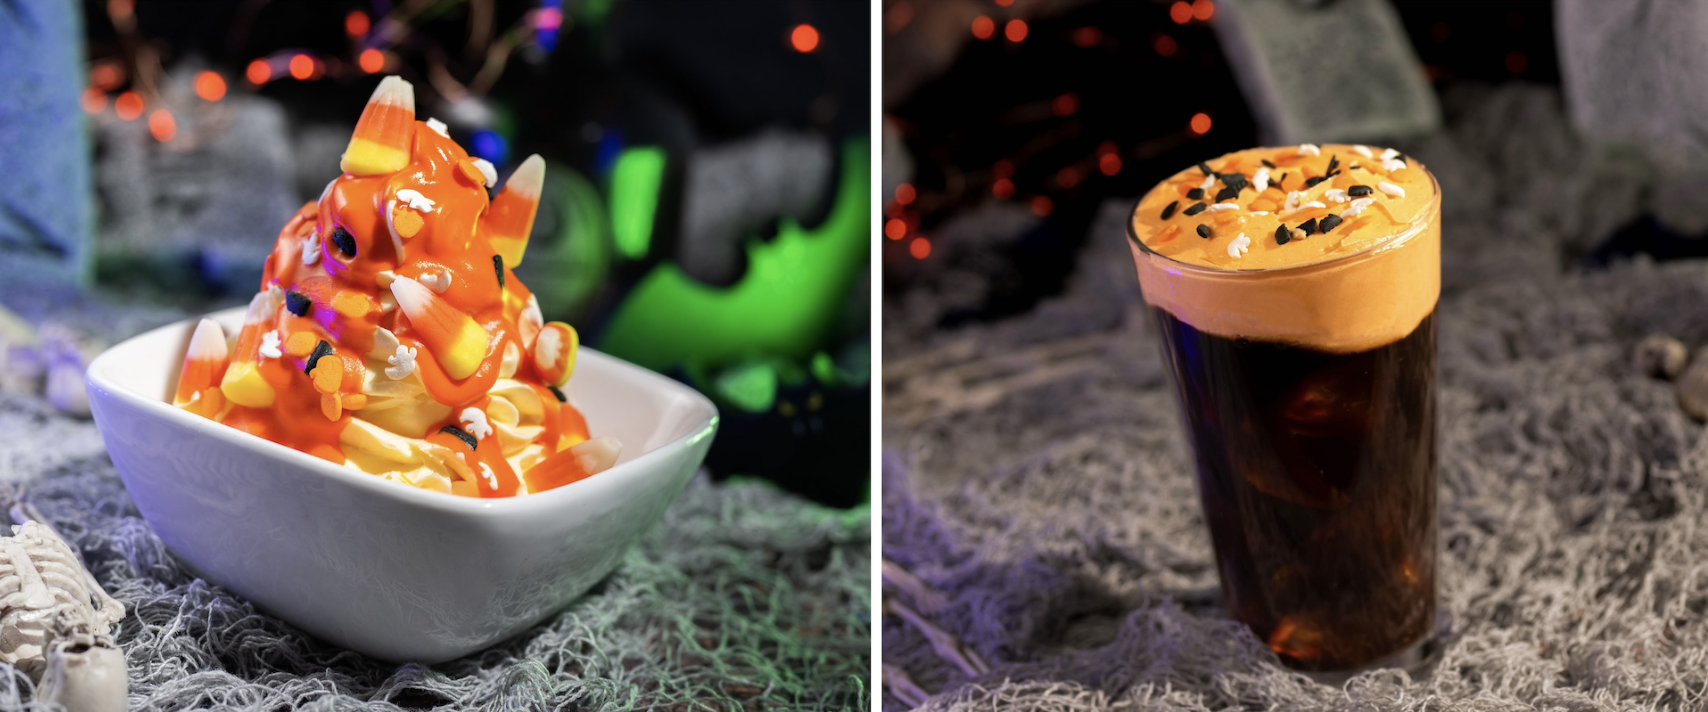 Mickey's Not-So-Scary Halloween Party foodie guide